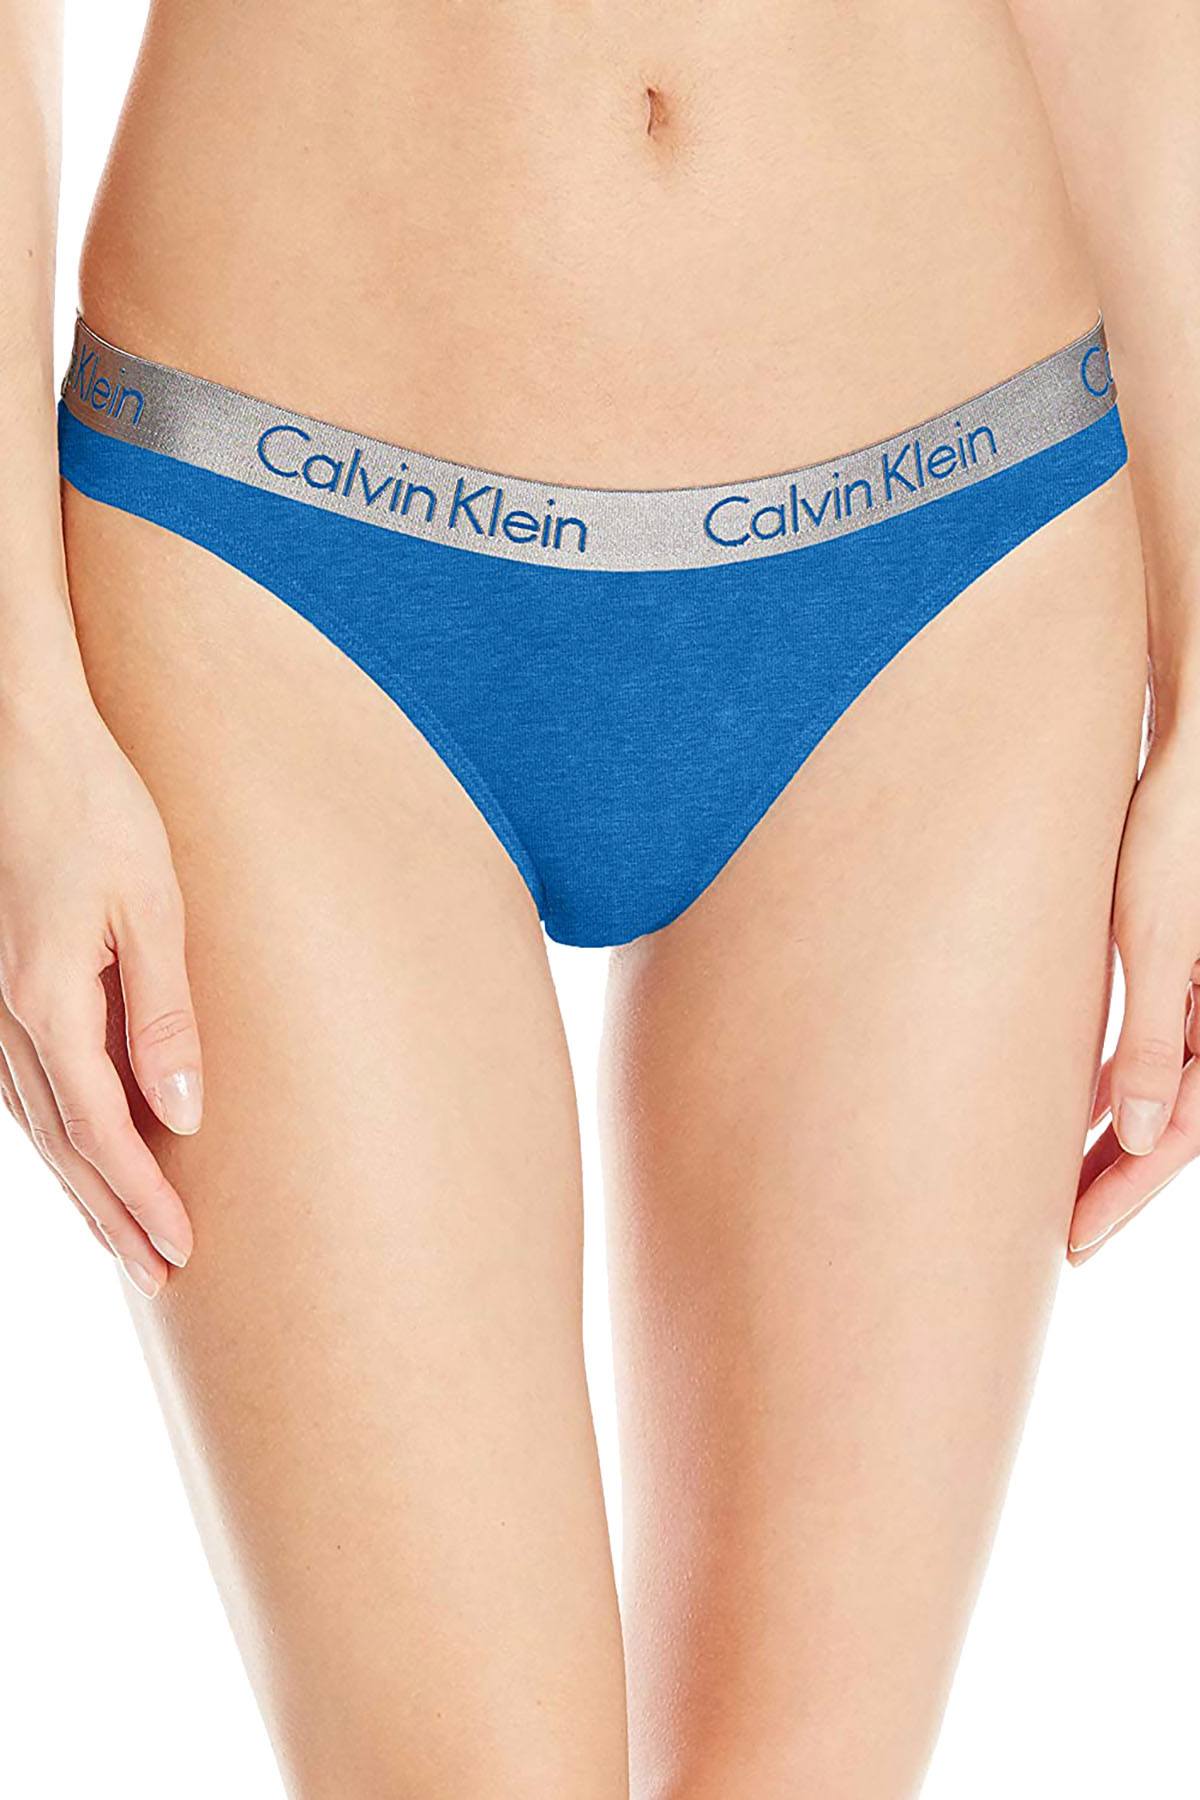 Calvin Klein Commodore-Blue Radiant Cotton Thong